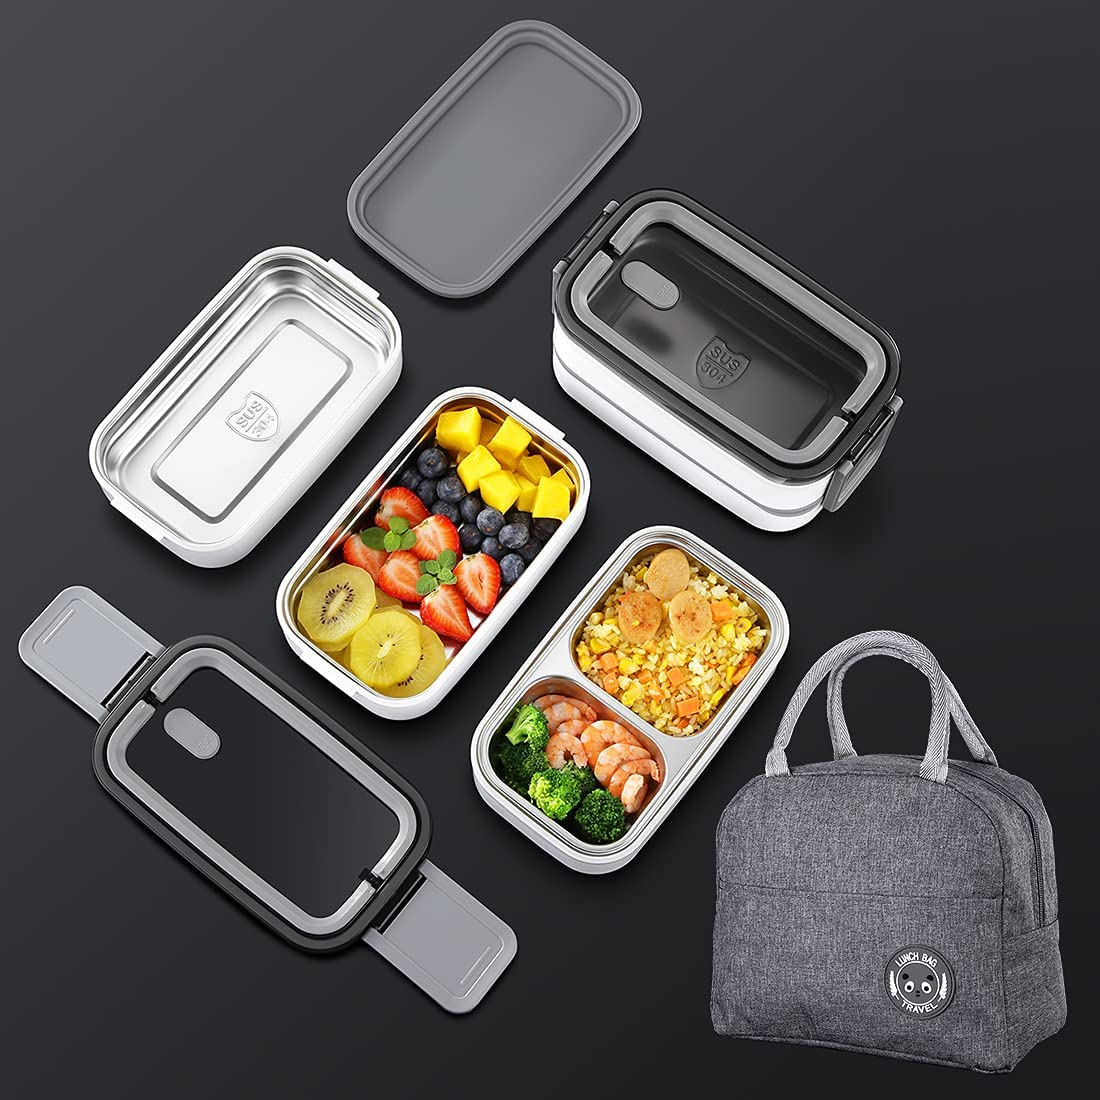 Details about   Insulated Heat Thermal Lunch Bag 